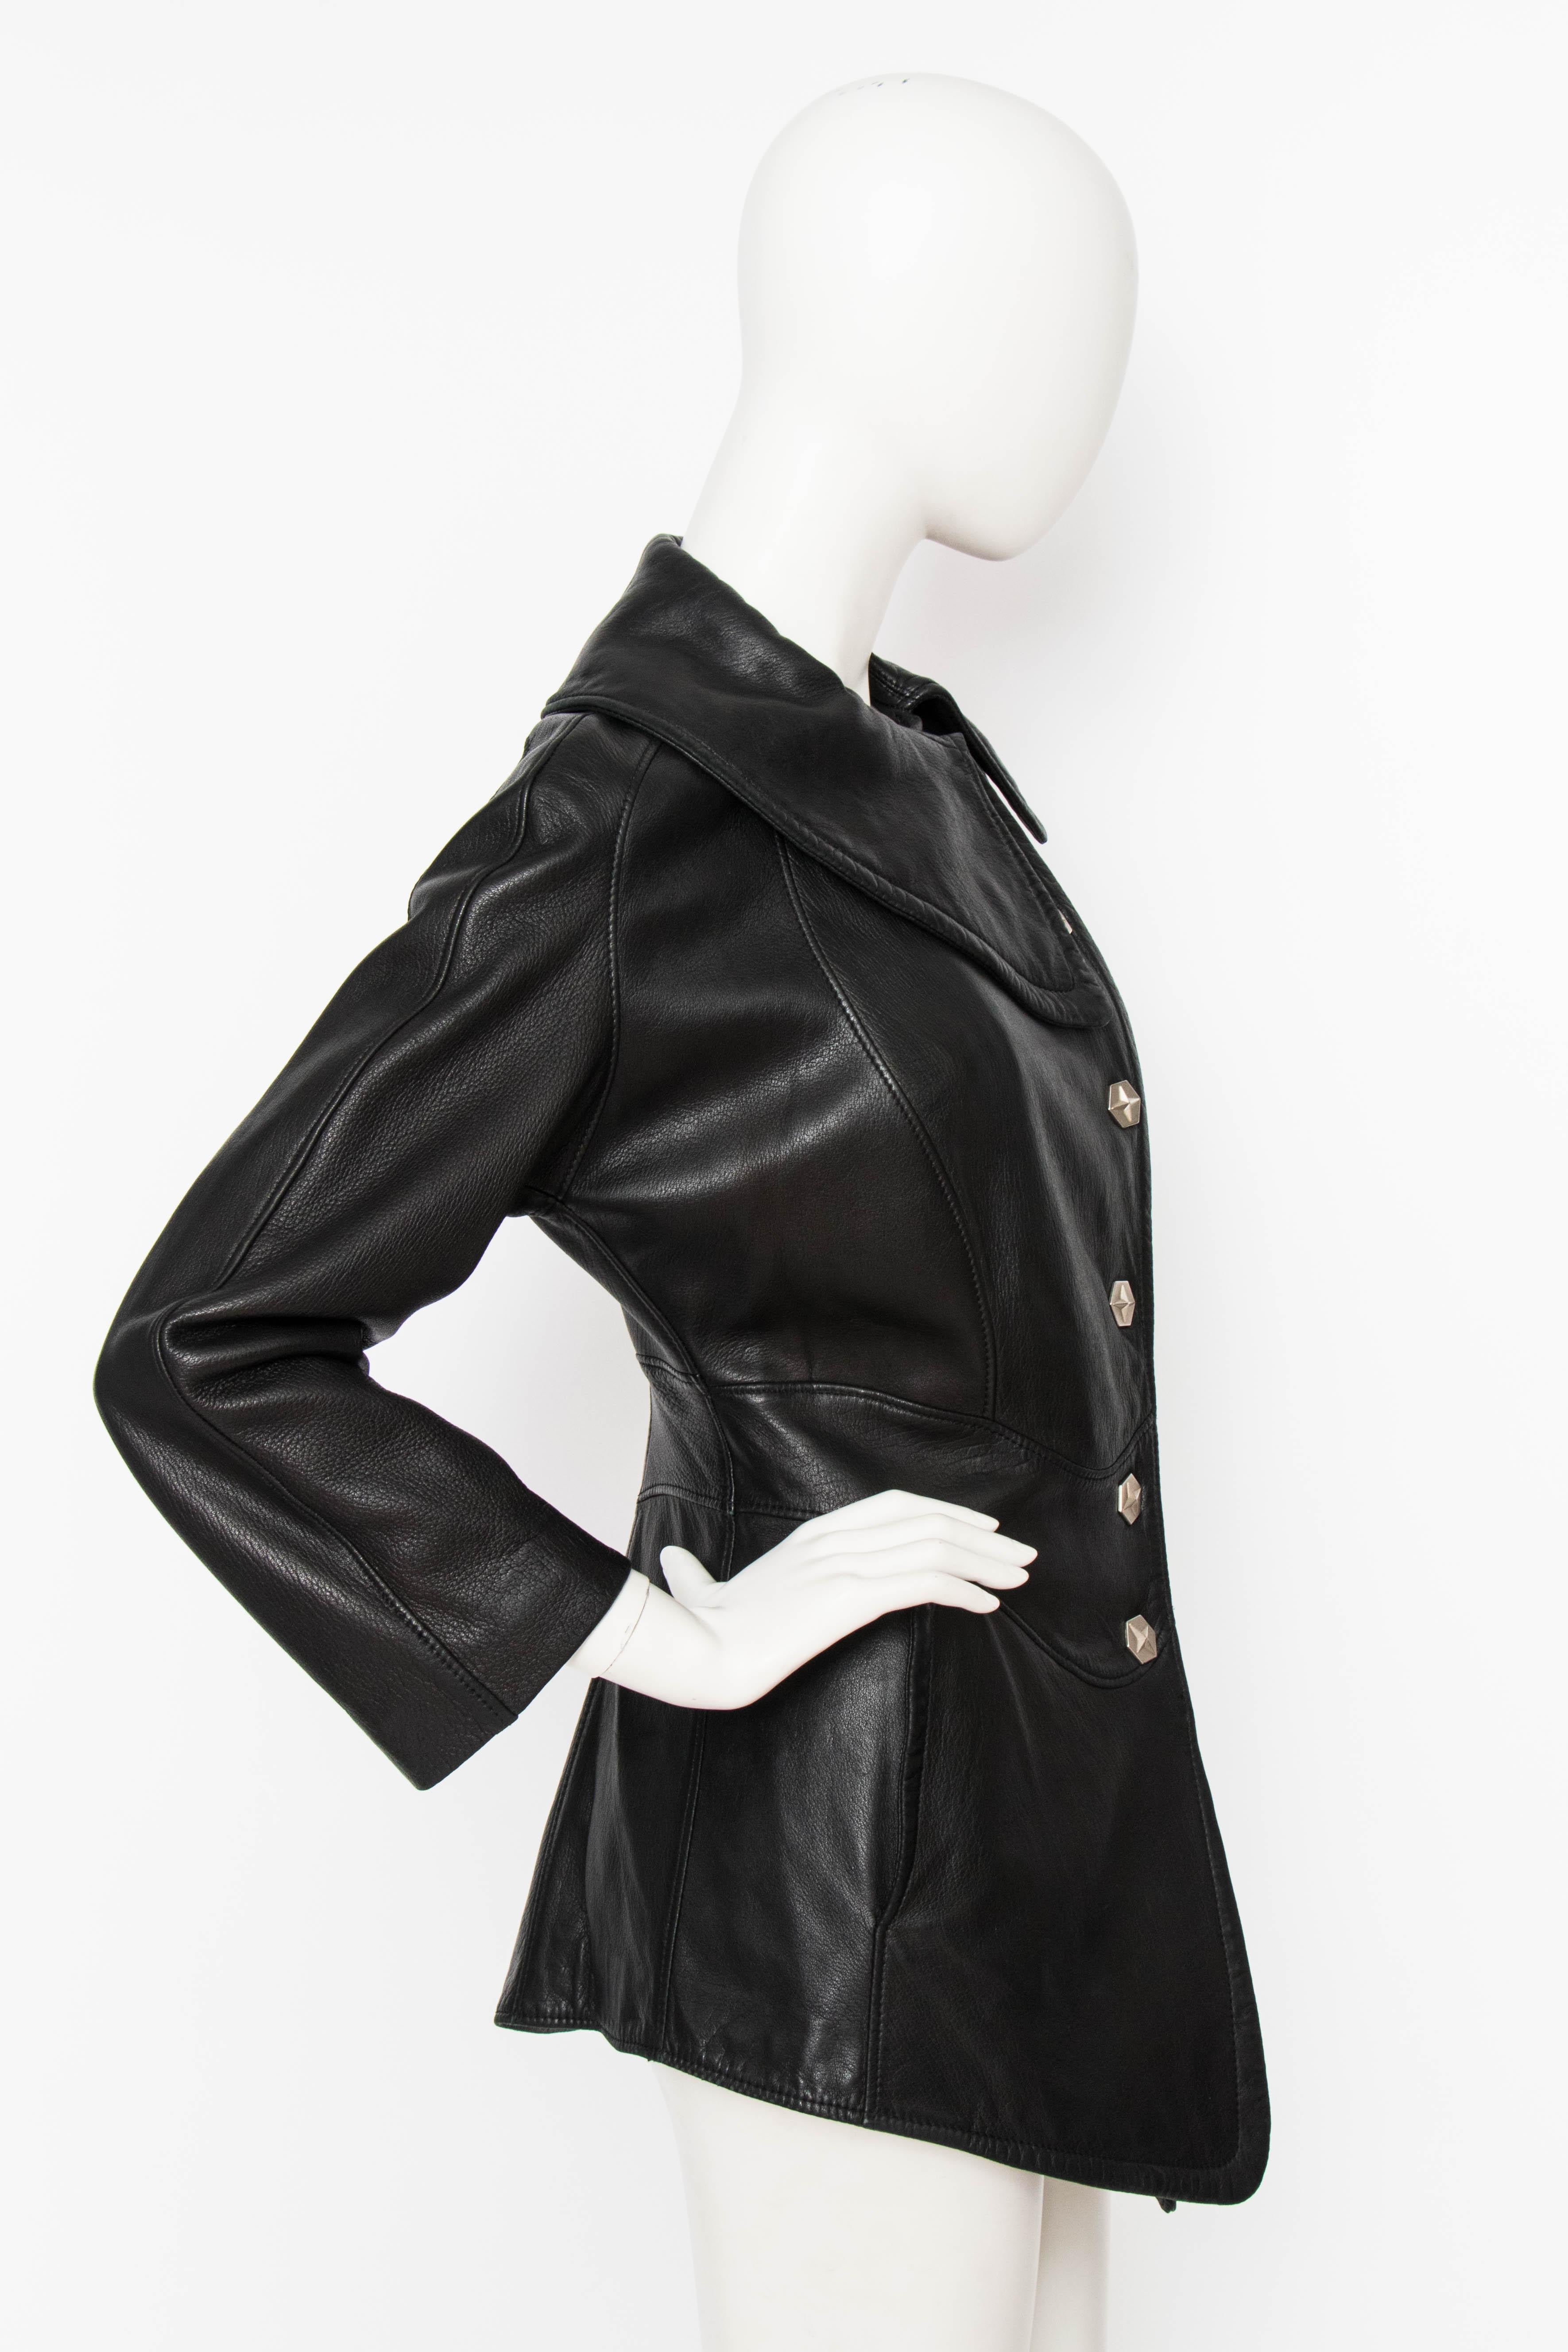 A 1980s Thierry Mugler Activ black leather jacket with an asymmetrical push button closure and a round asymmetrical collar. A horizontal panel accentuates the waistline and two vertical flap pockets are situated at the hip. The jacket is fully